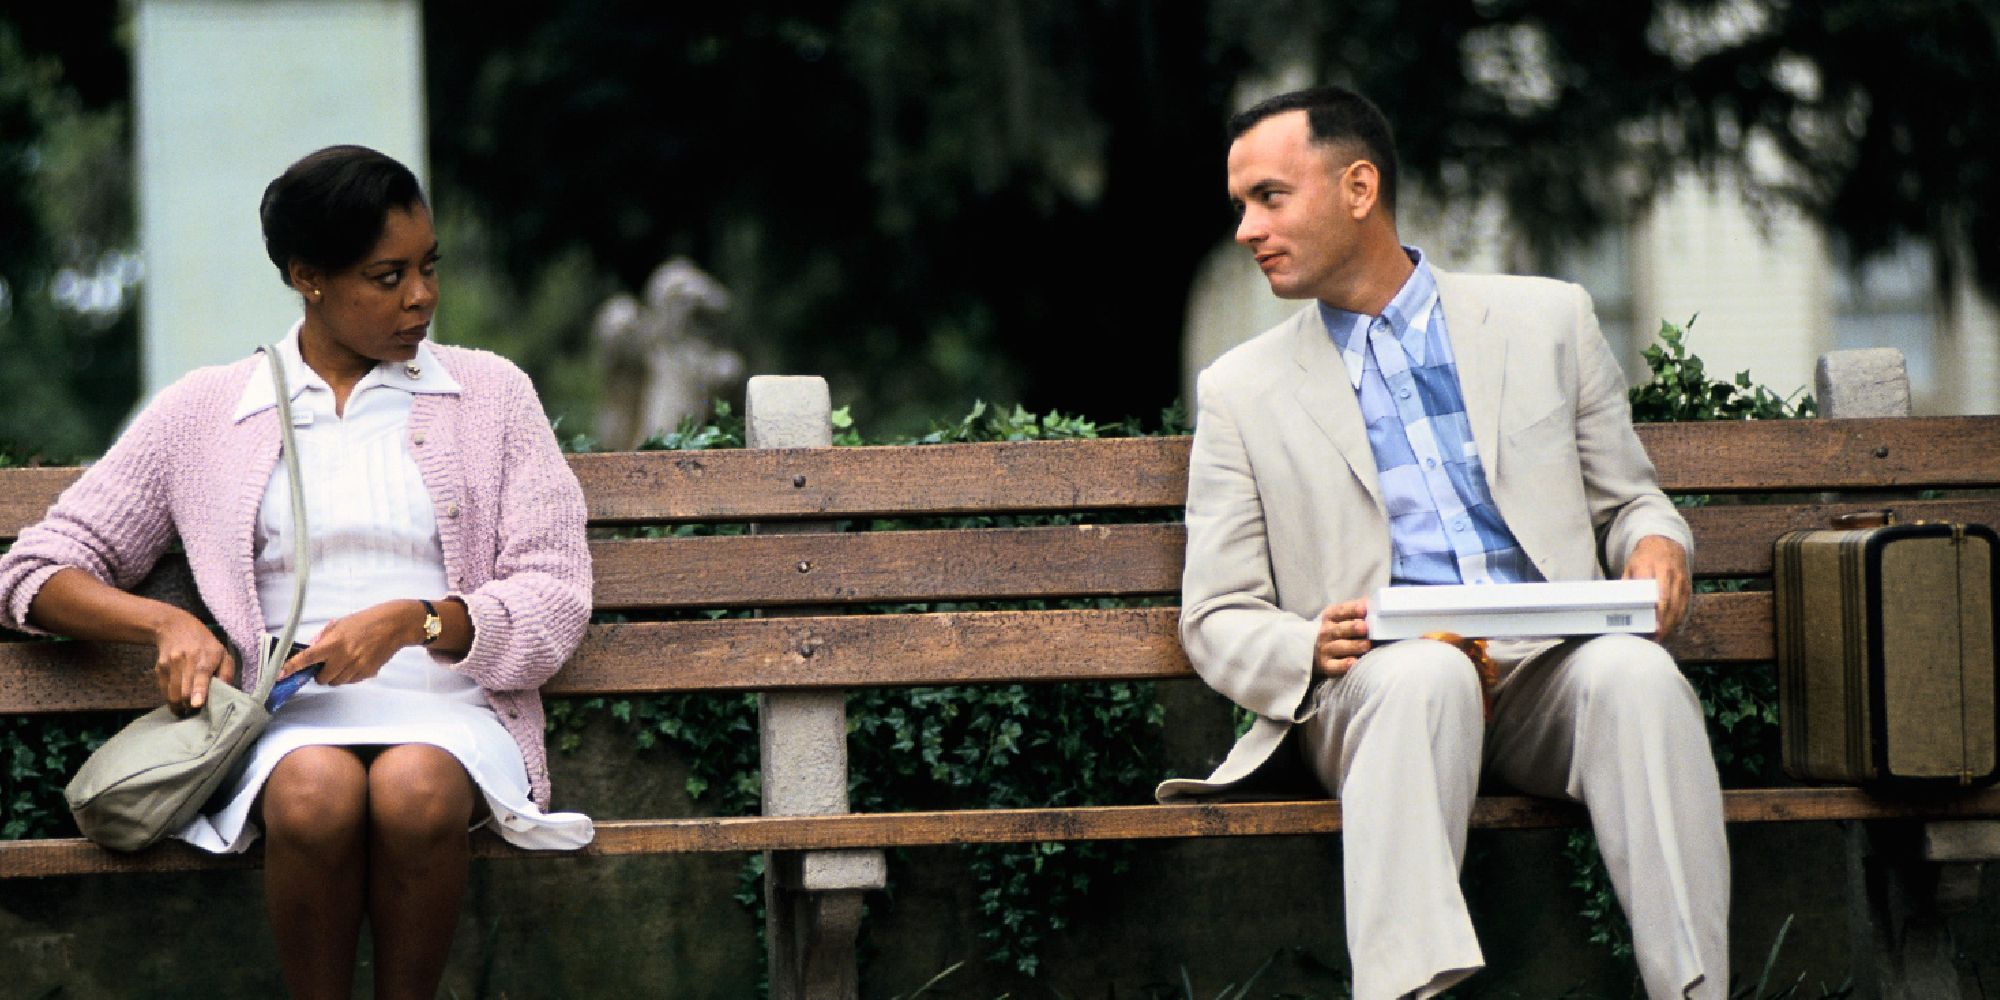 Forrest Gump talking to a nurse while sitting on a park bench in Forrest Gump